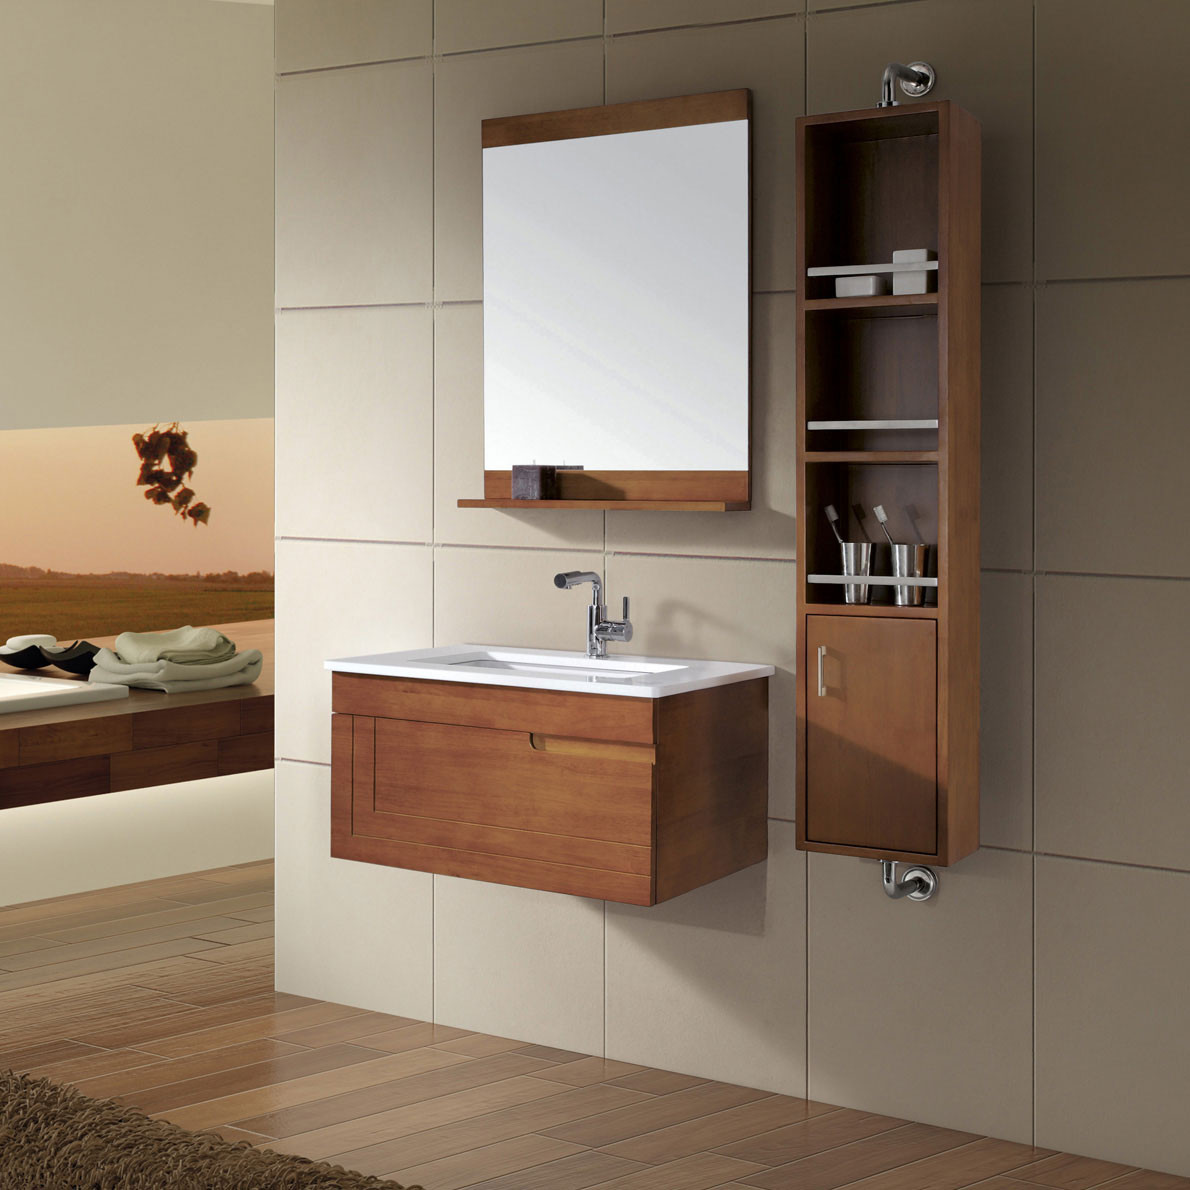 Bathroom Storage Cabinet Ideas
 Various Bathroom Cabinet Ideas and Tips for Dealing with